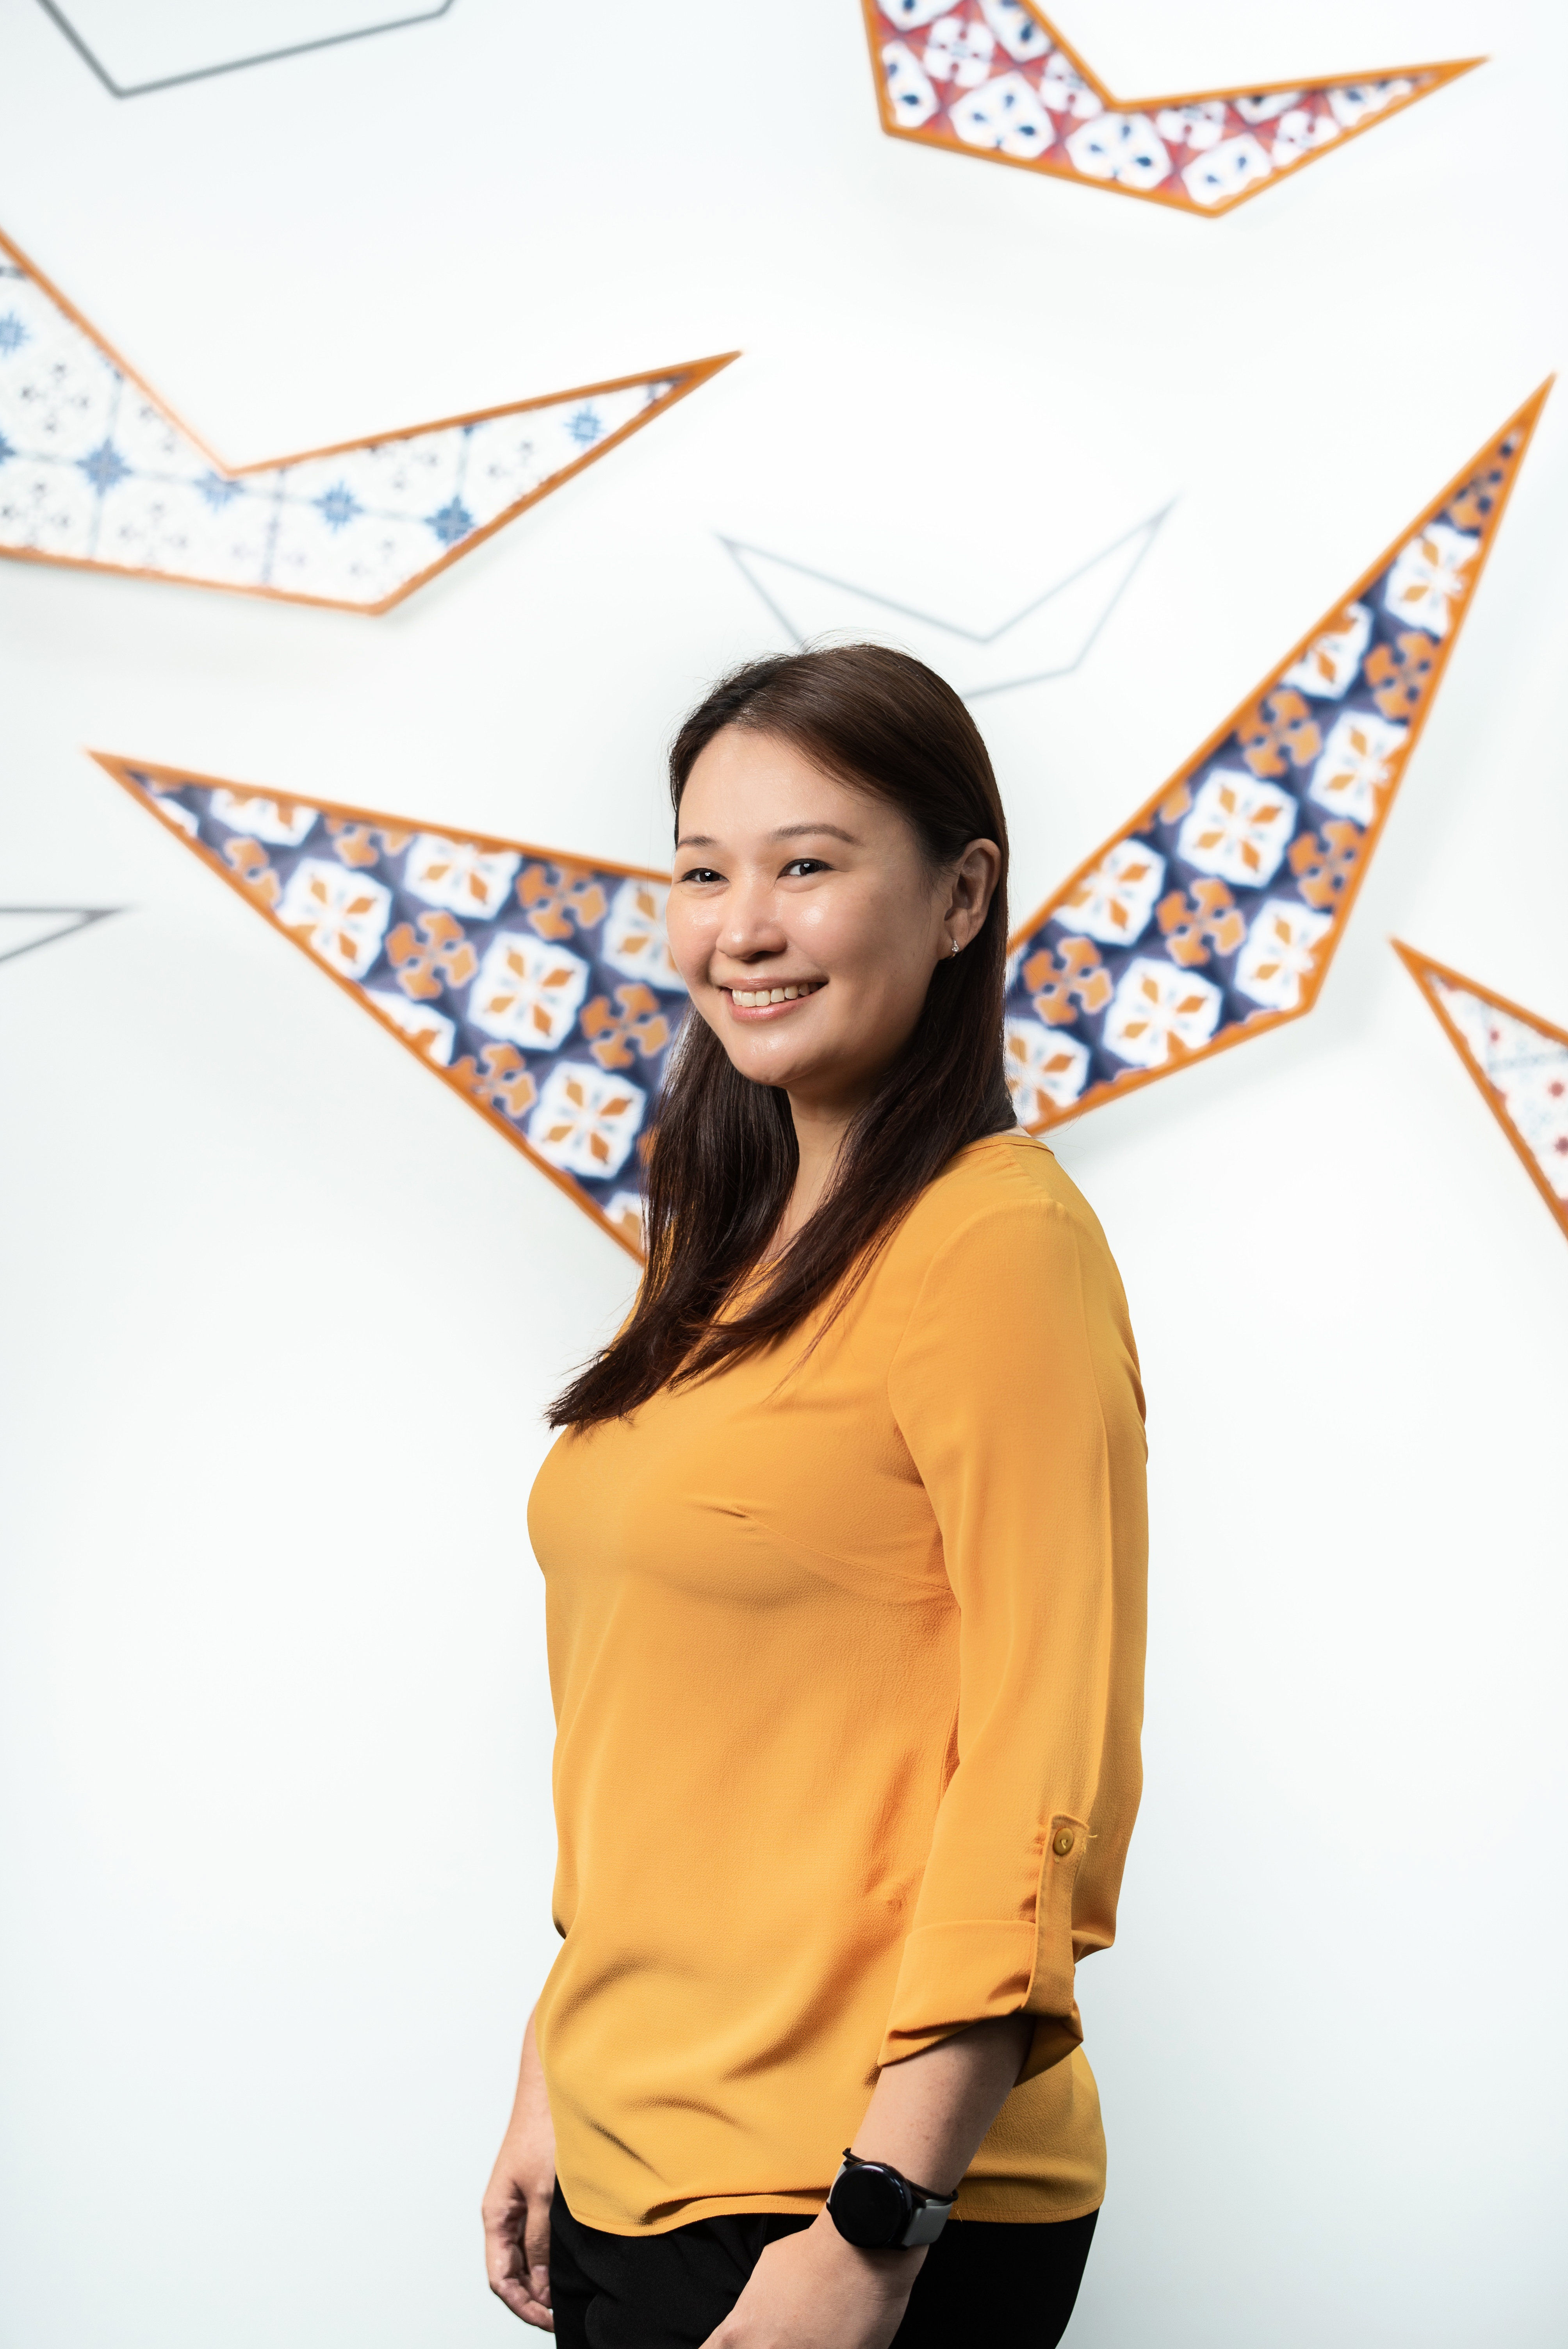 Esther New - Head of Project Management, Asia Pacific